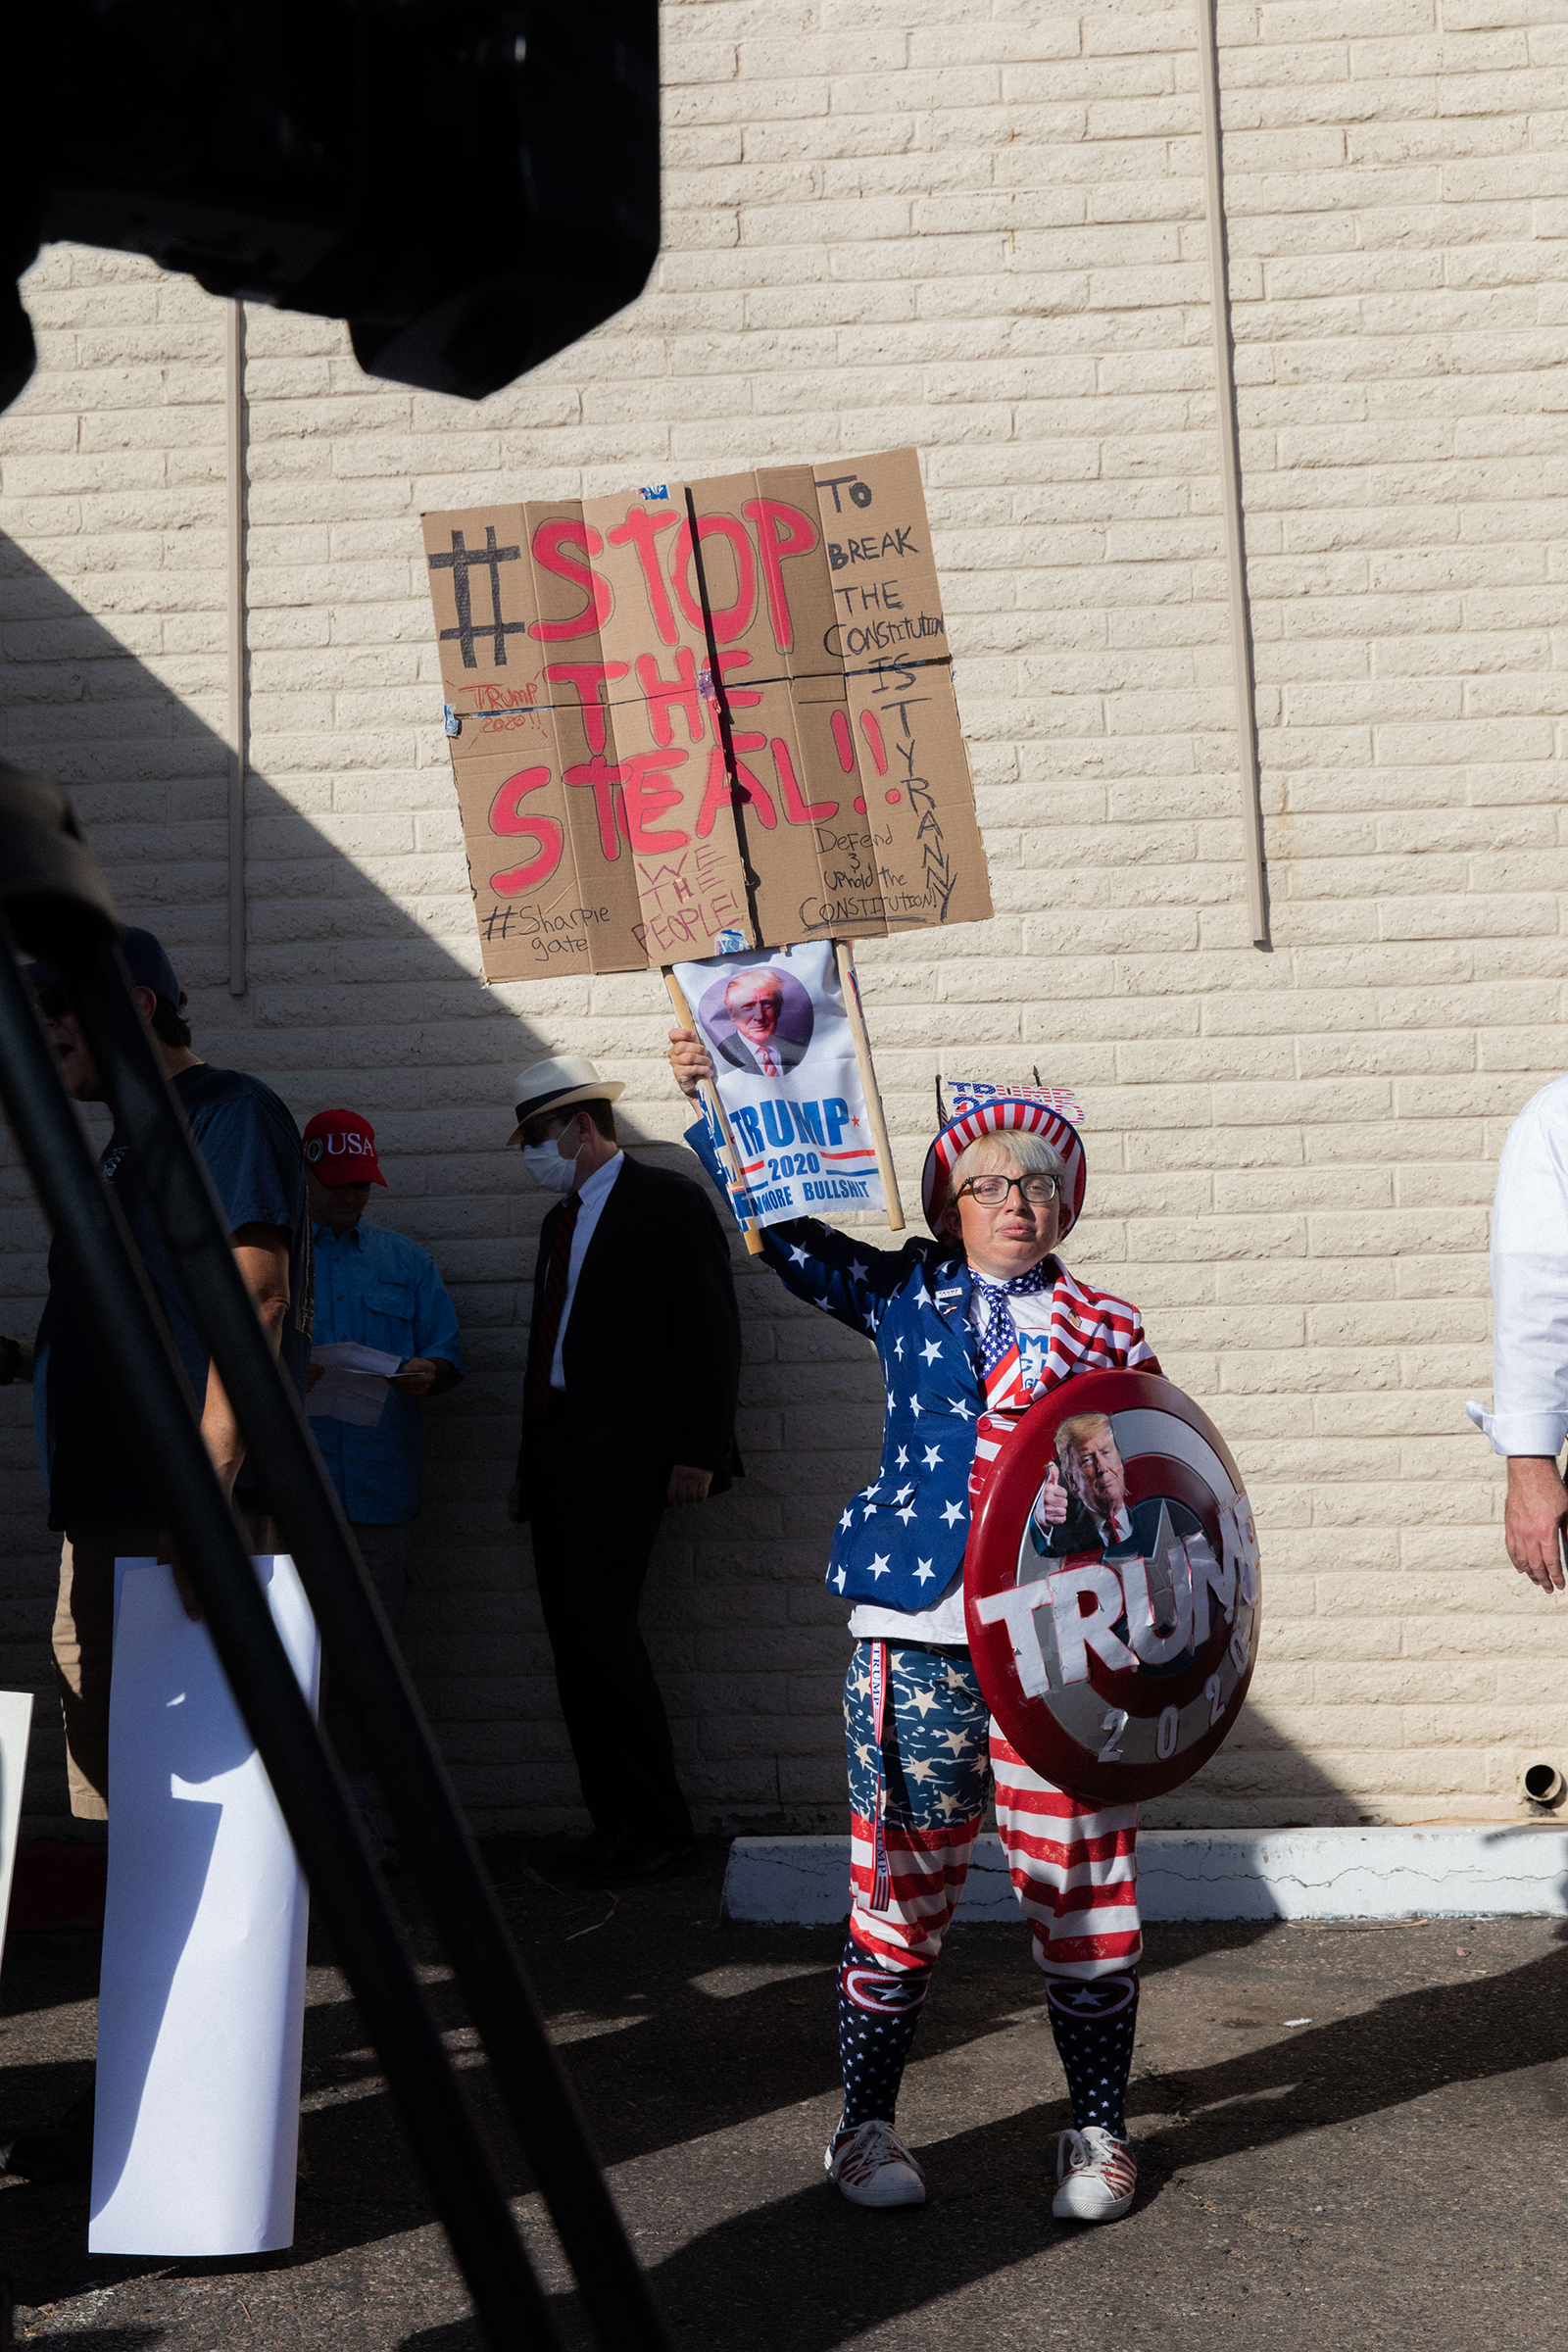 Trump supporters gathered outside the Maricopa County Republican Party office in Phoenix on Nov. 5 (Sinna Nasseri for TIME)